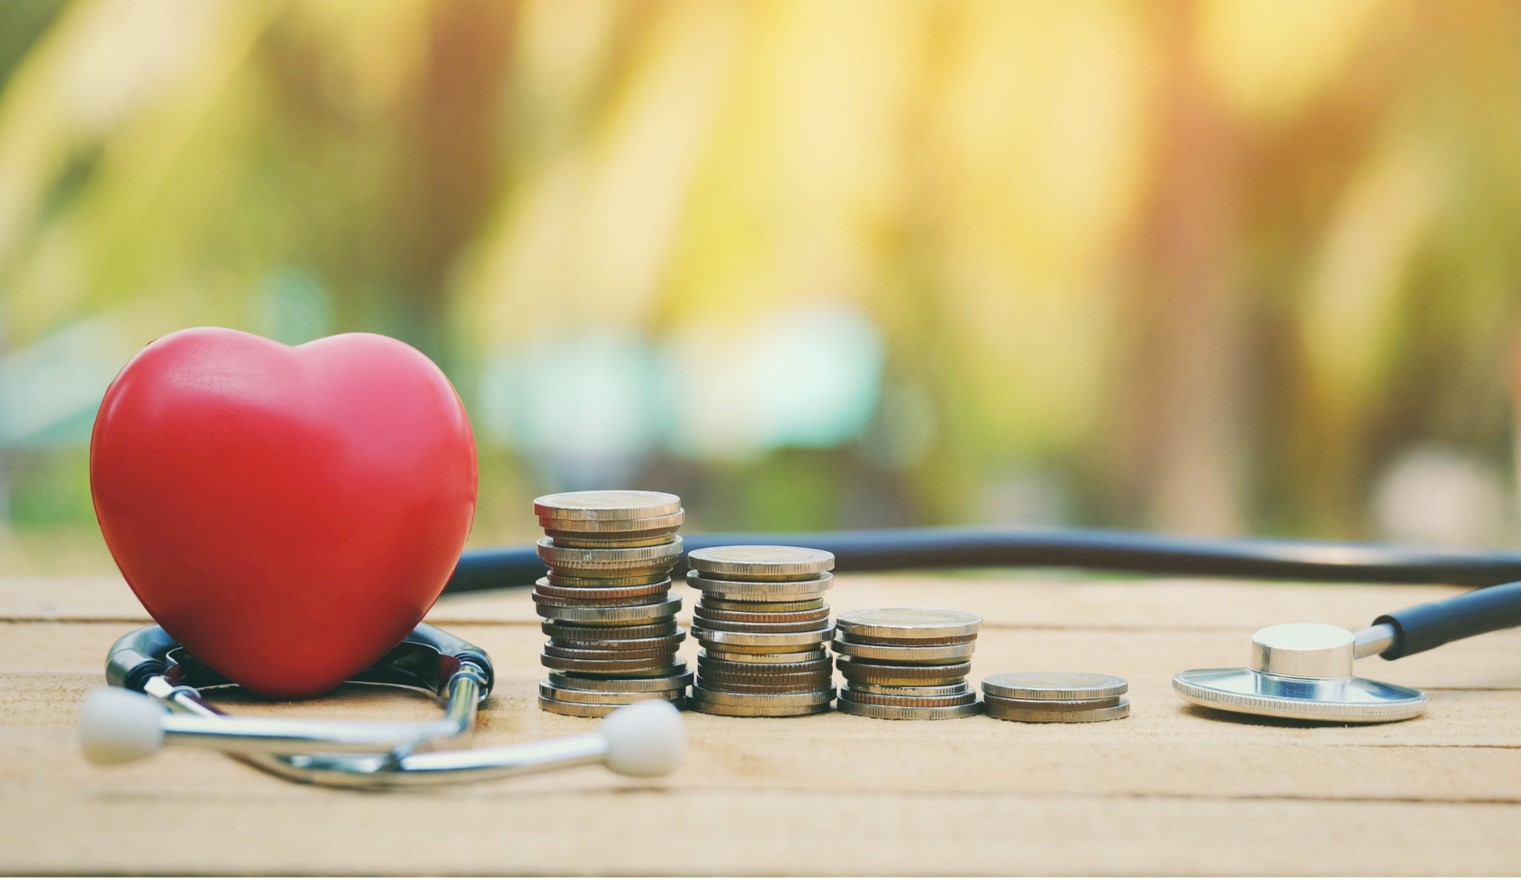 Red glass heart on top of a stethoscope next to stacks of coins